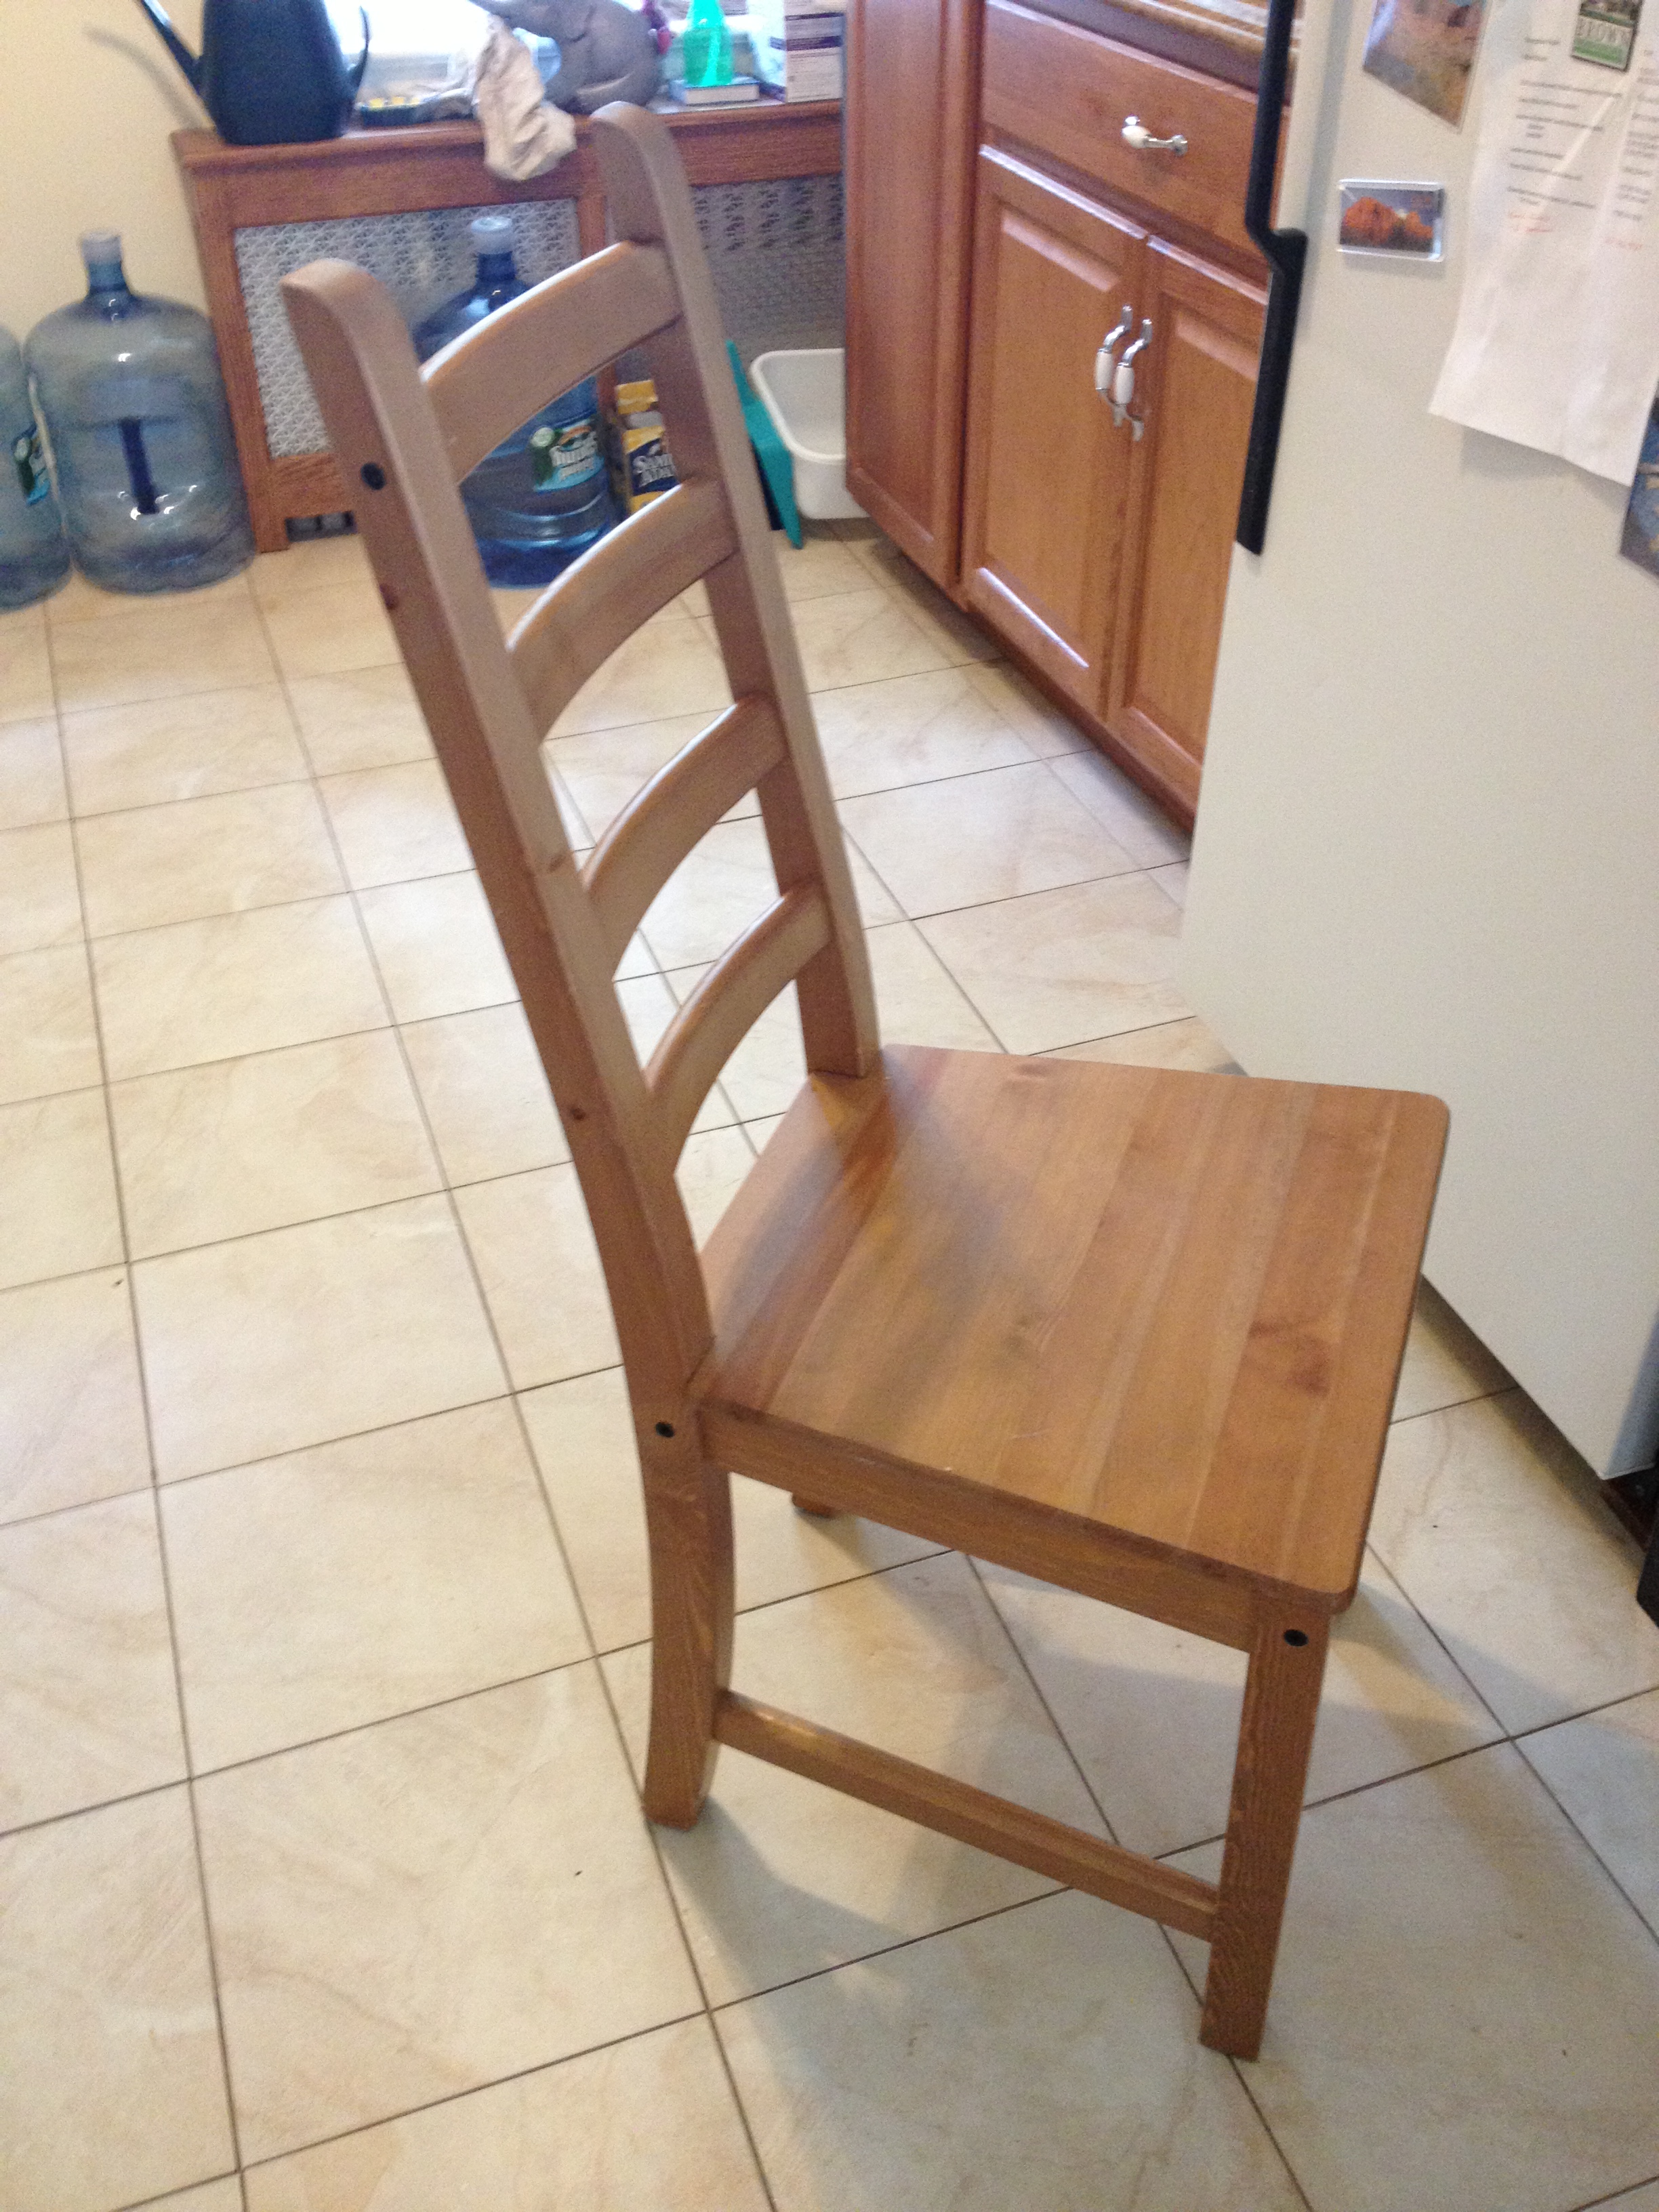 Claimed 2 Ikea Kaustby Chairs 20 Each North Riverdale Garage Sale